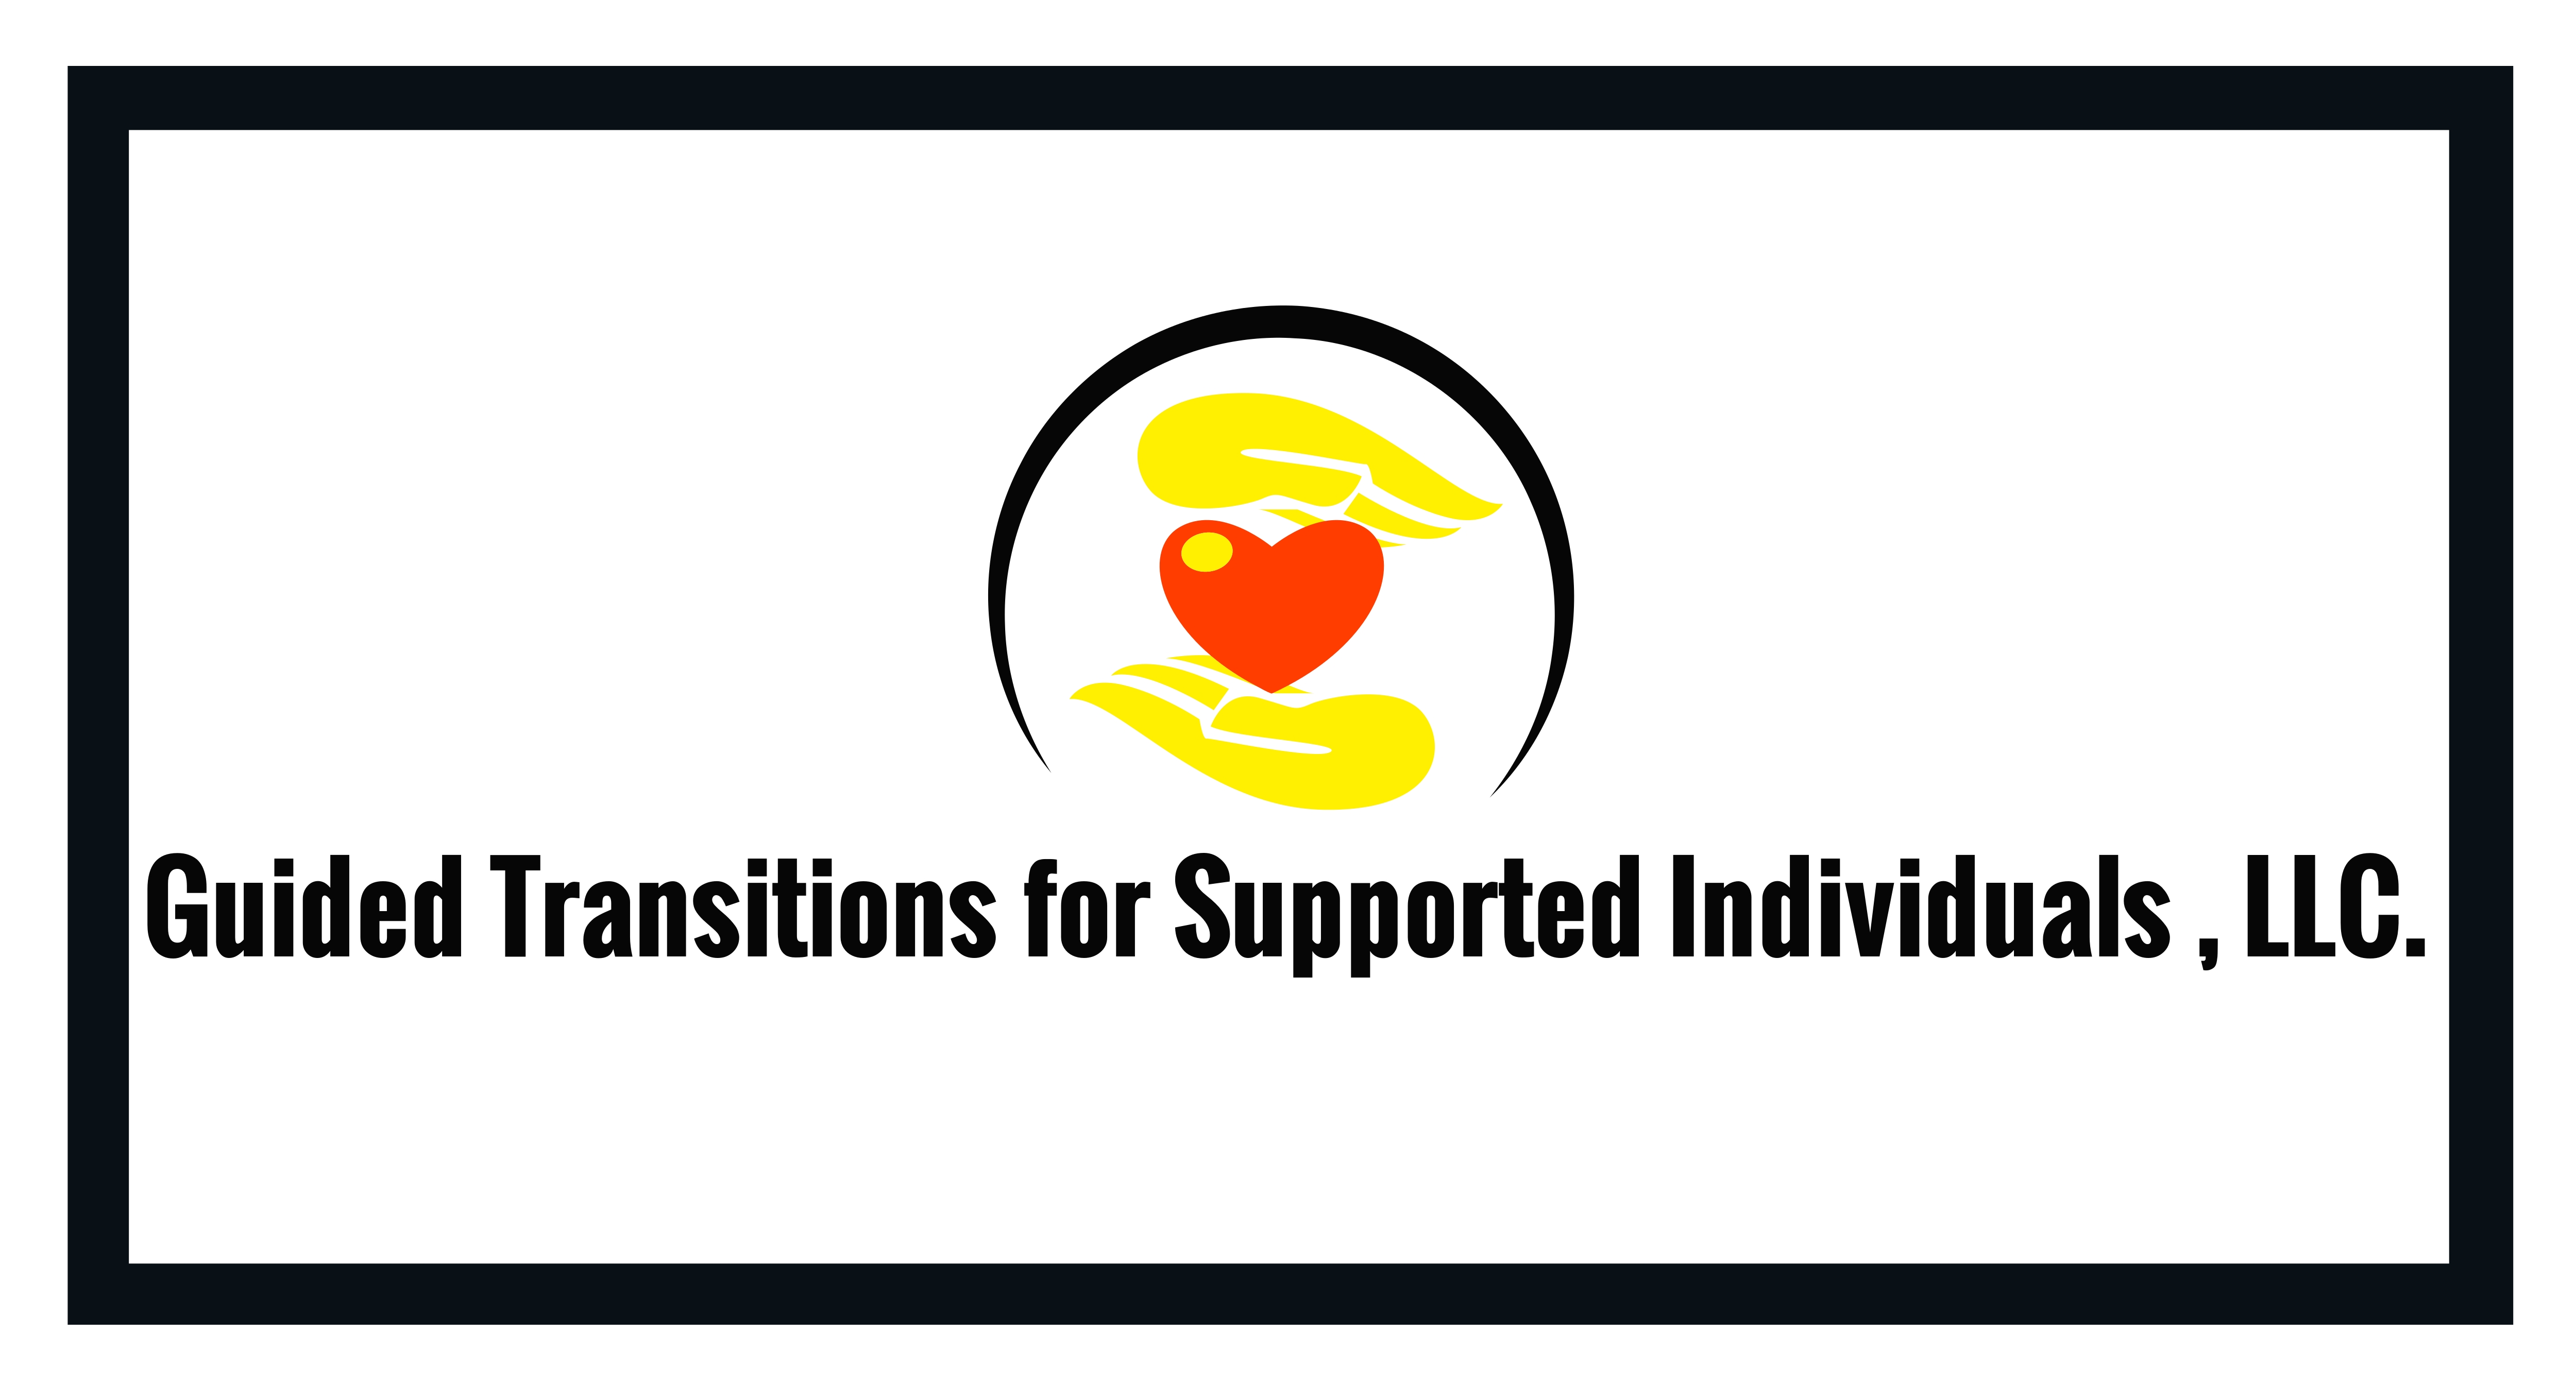 Guided Transitions for Supported Individuals, LLC